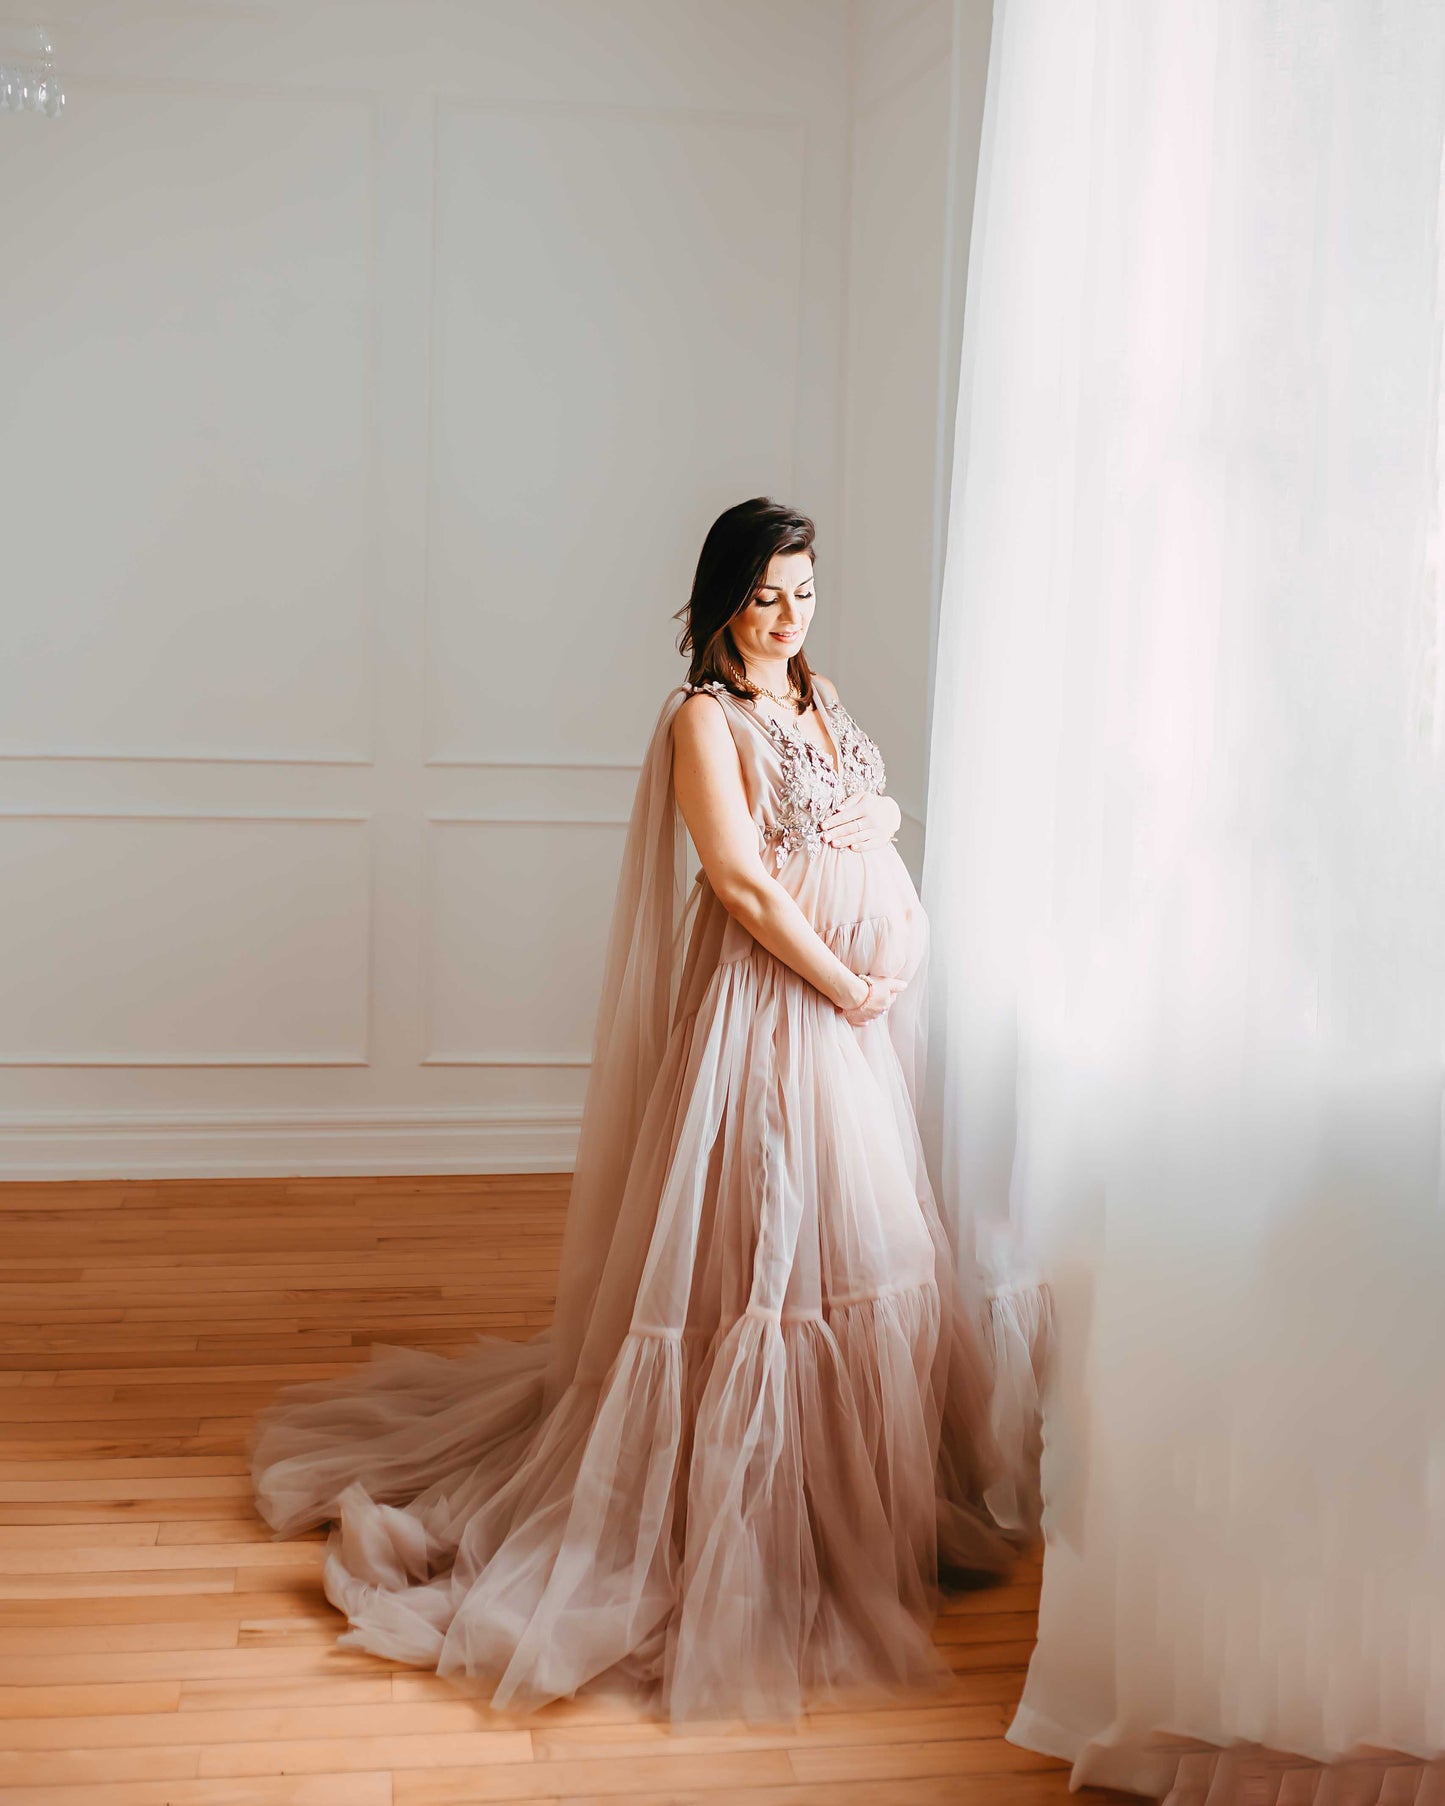 Cappuccino Wisteria Gown - maternity photoshoot dress